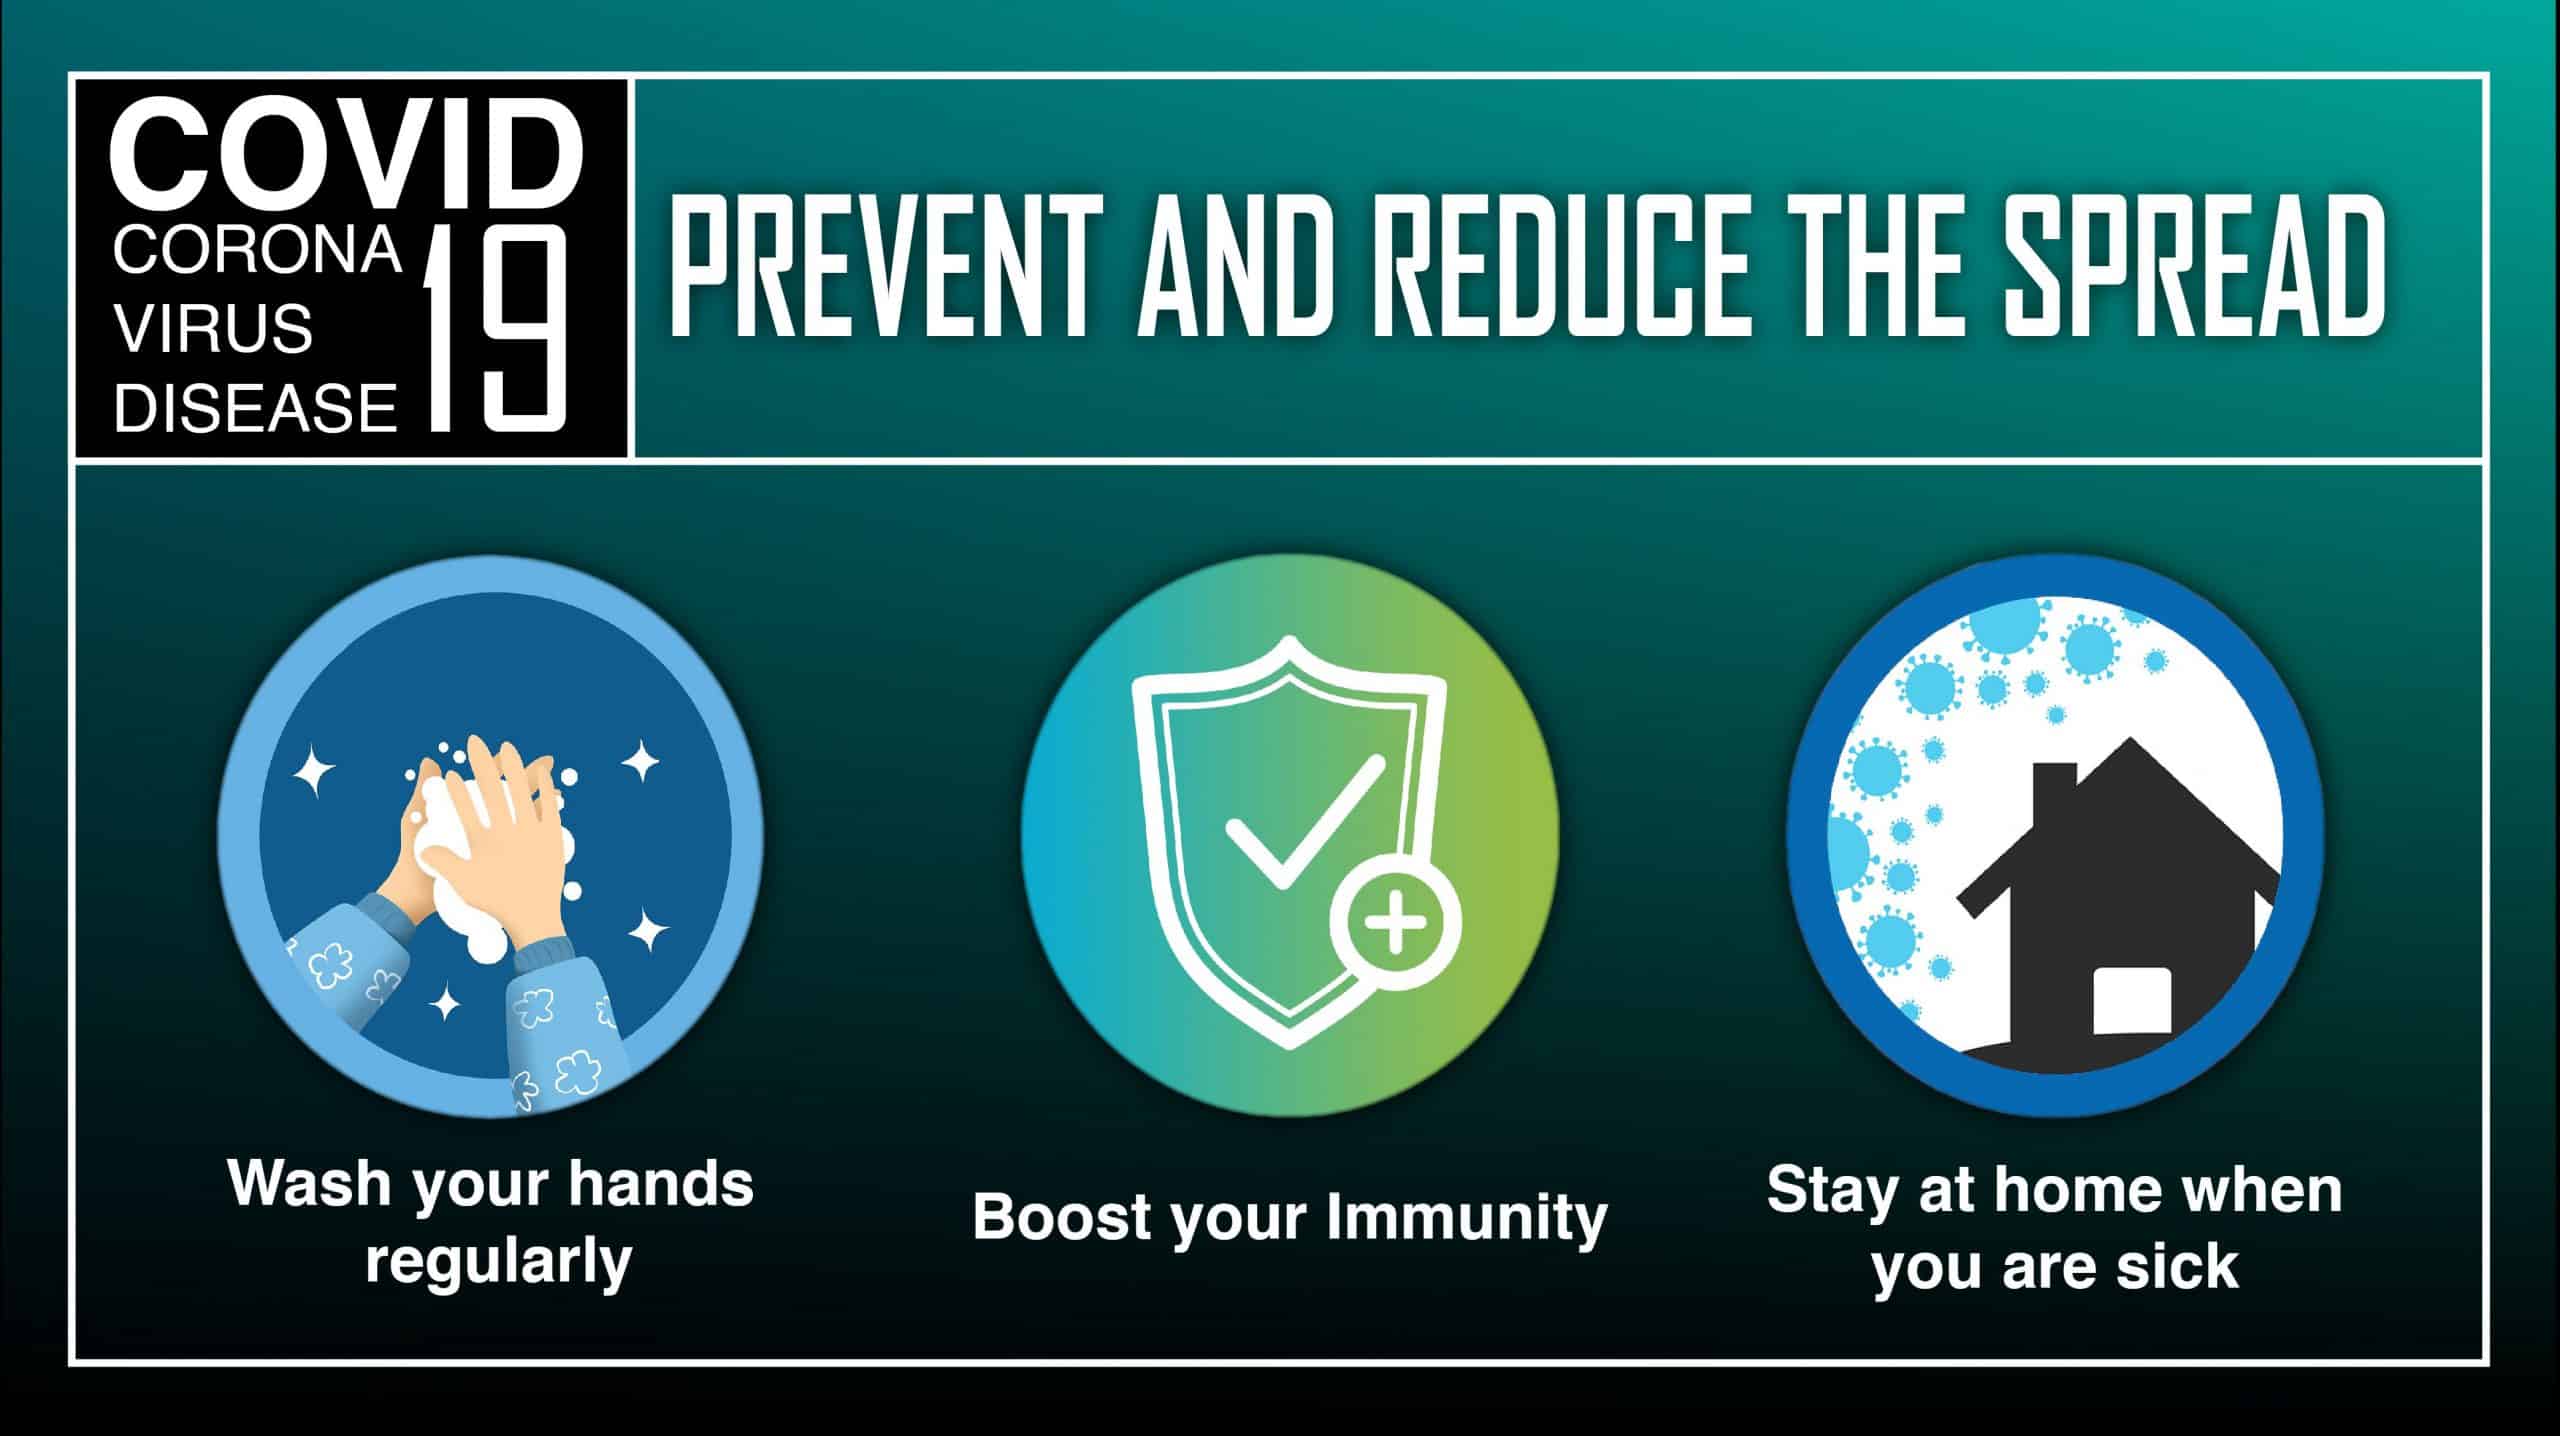 Fight coronavirus by washing hands, boosting immunity, stay home when you are sick